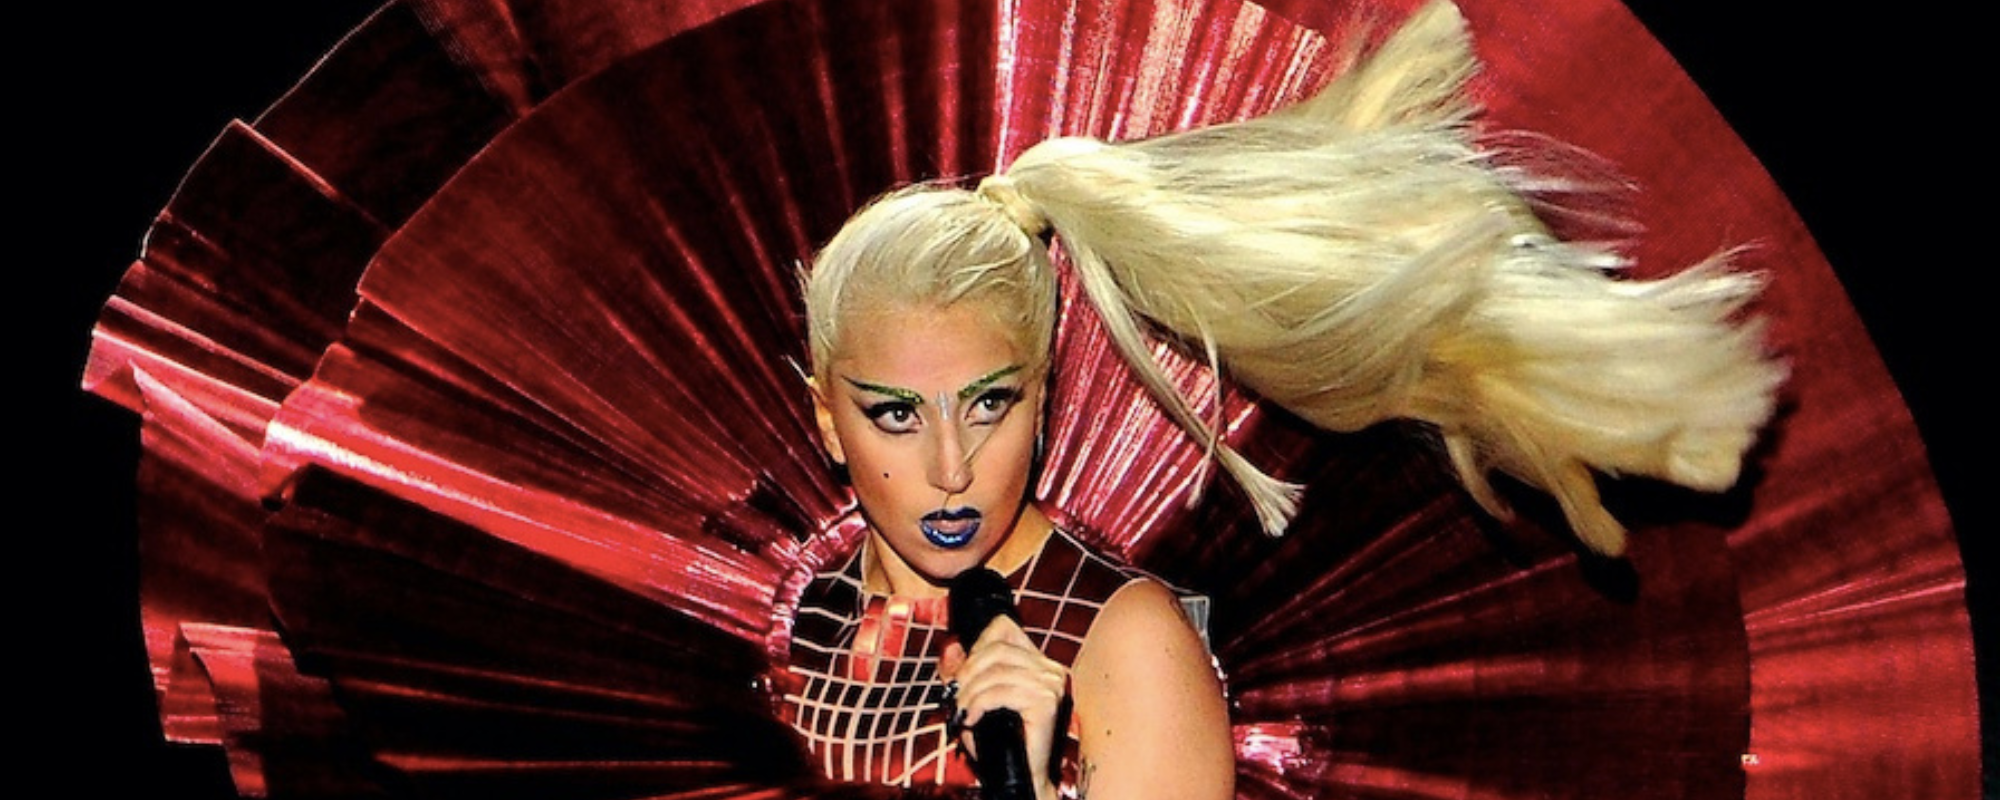 The Meaning and Inspiration Behind Lady Gaga’s “The Edge of Glory”